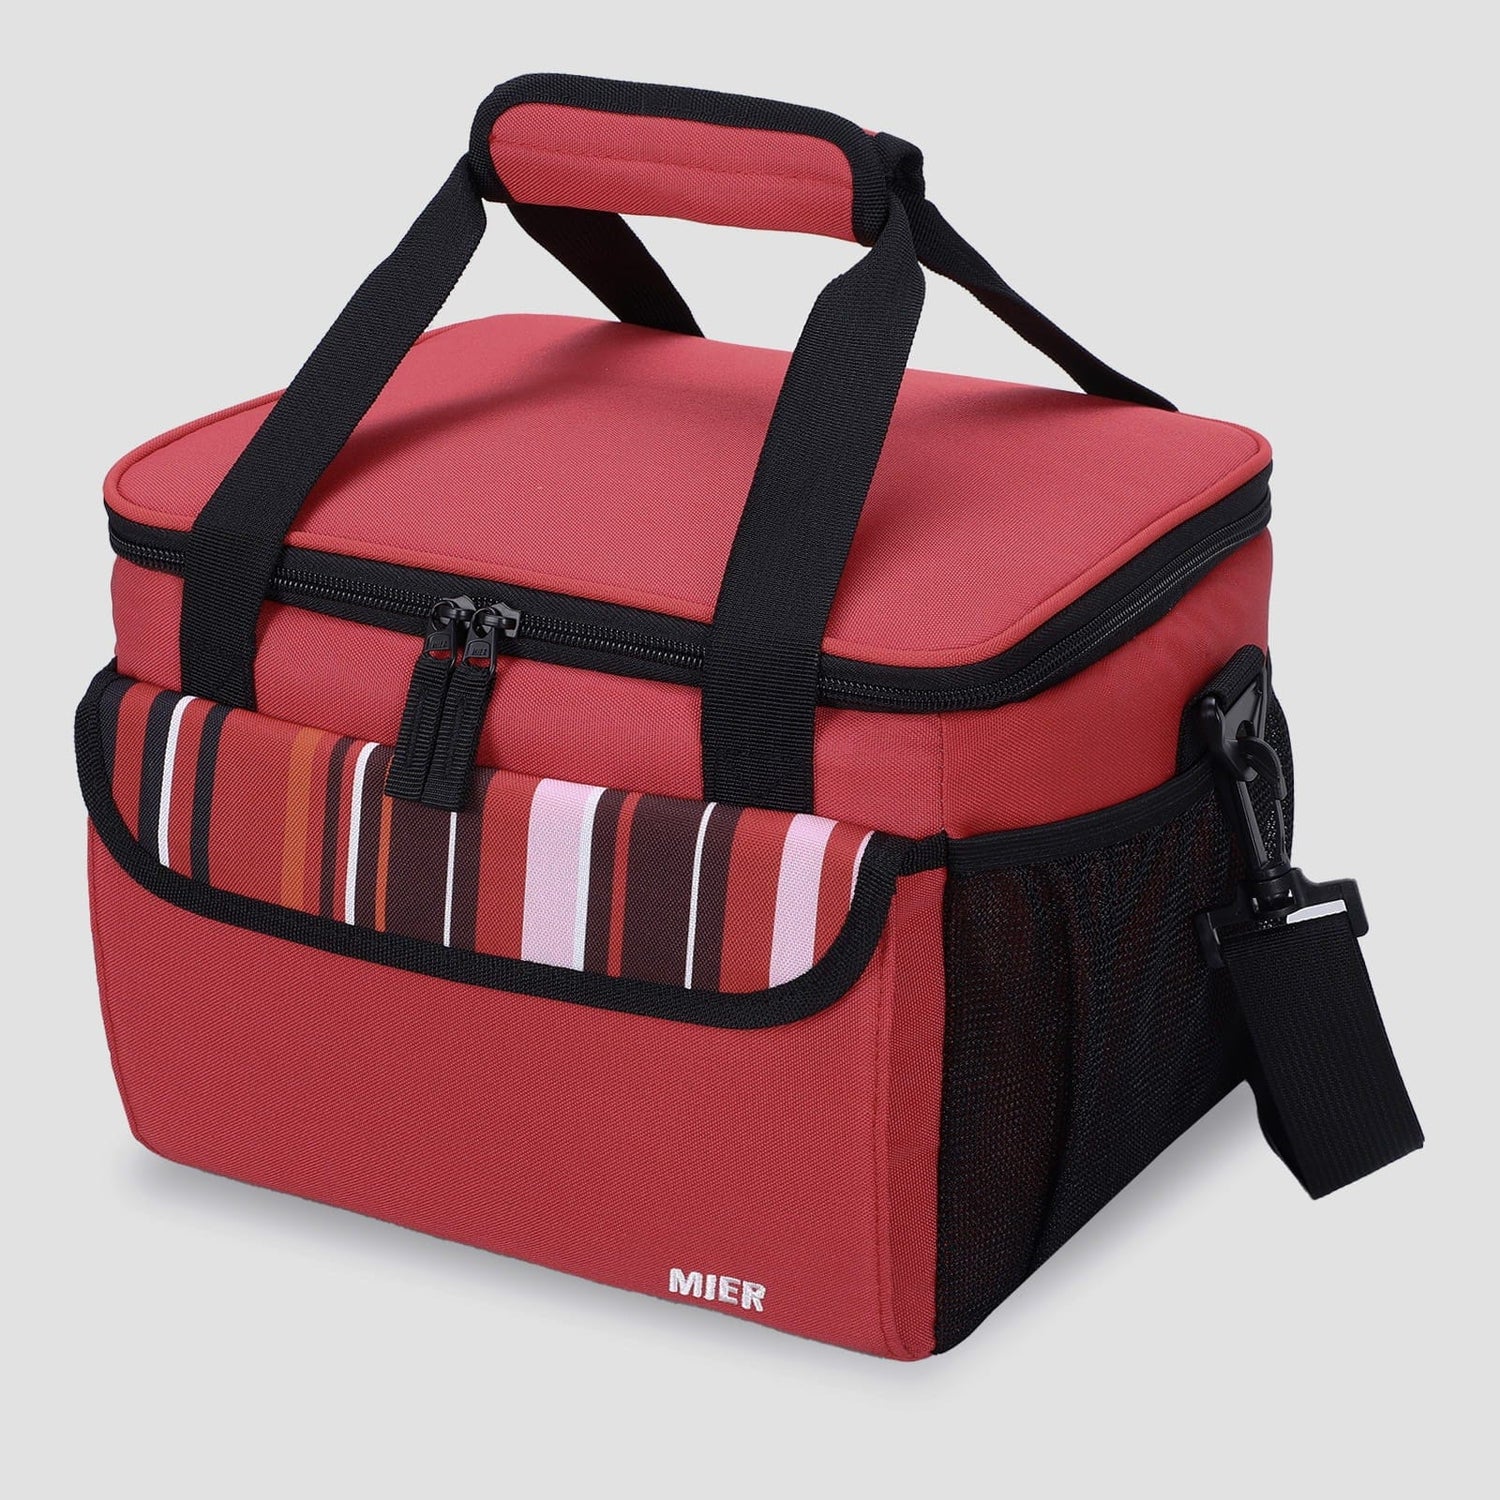 Large Lunch Box for Men Insulated Lunch Bags Adult Lunch Bag Red Stripes MIER